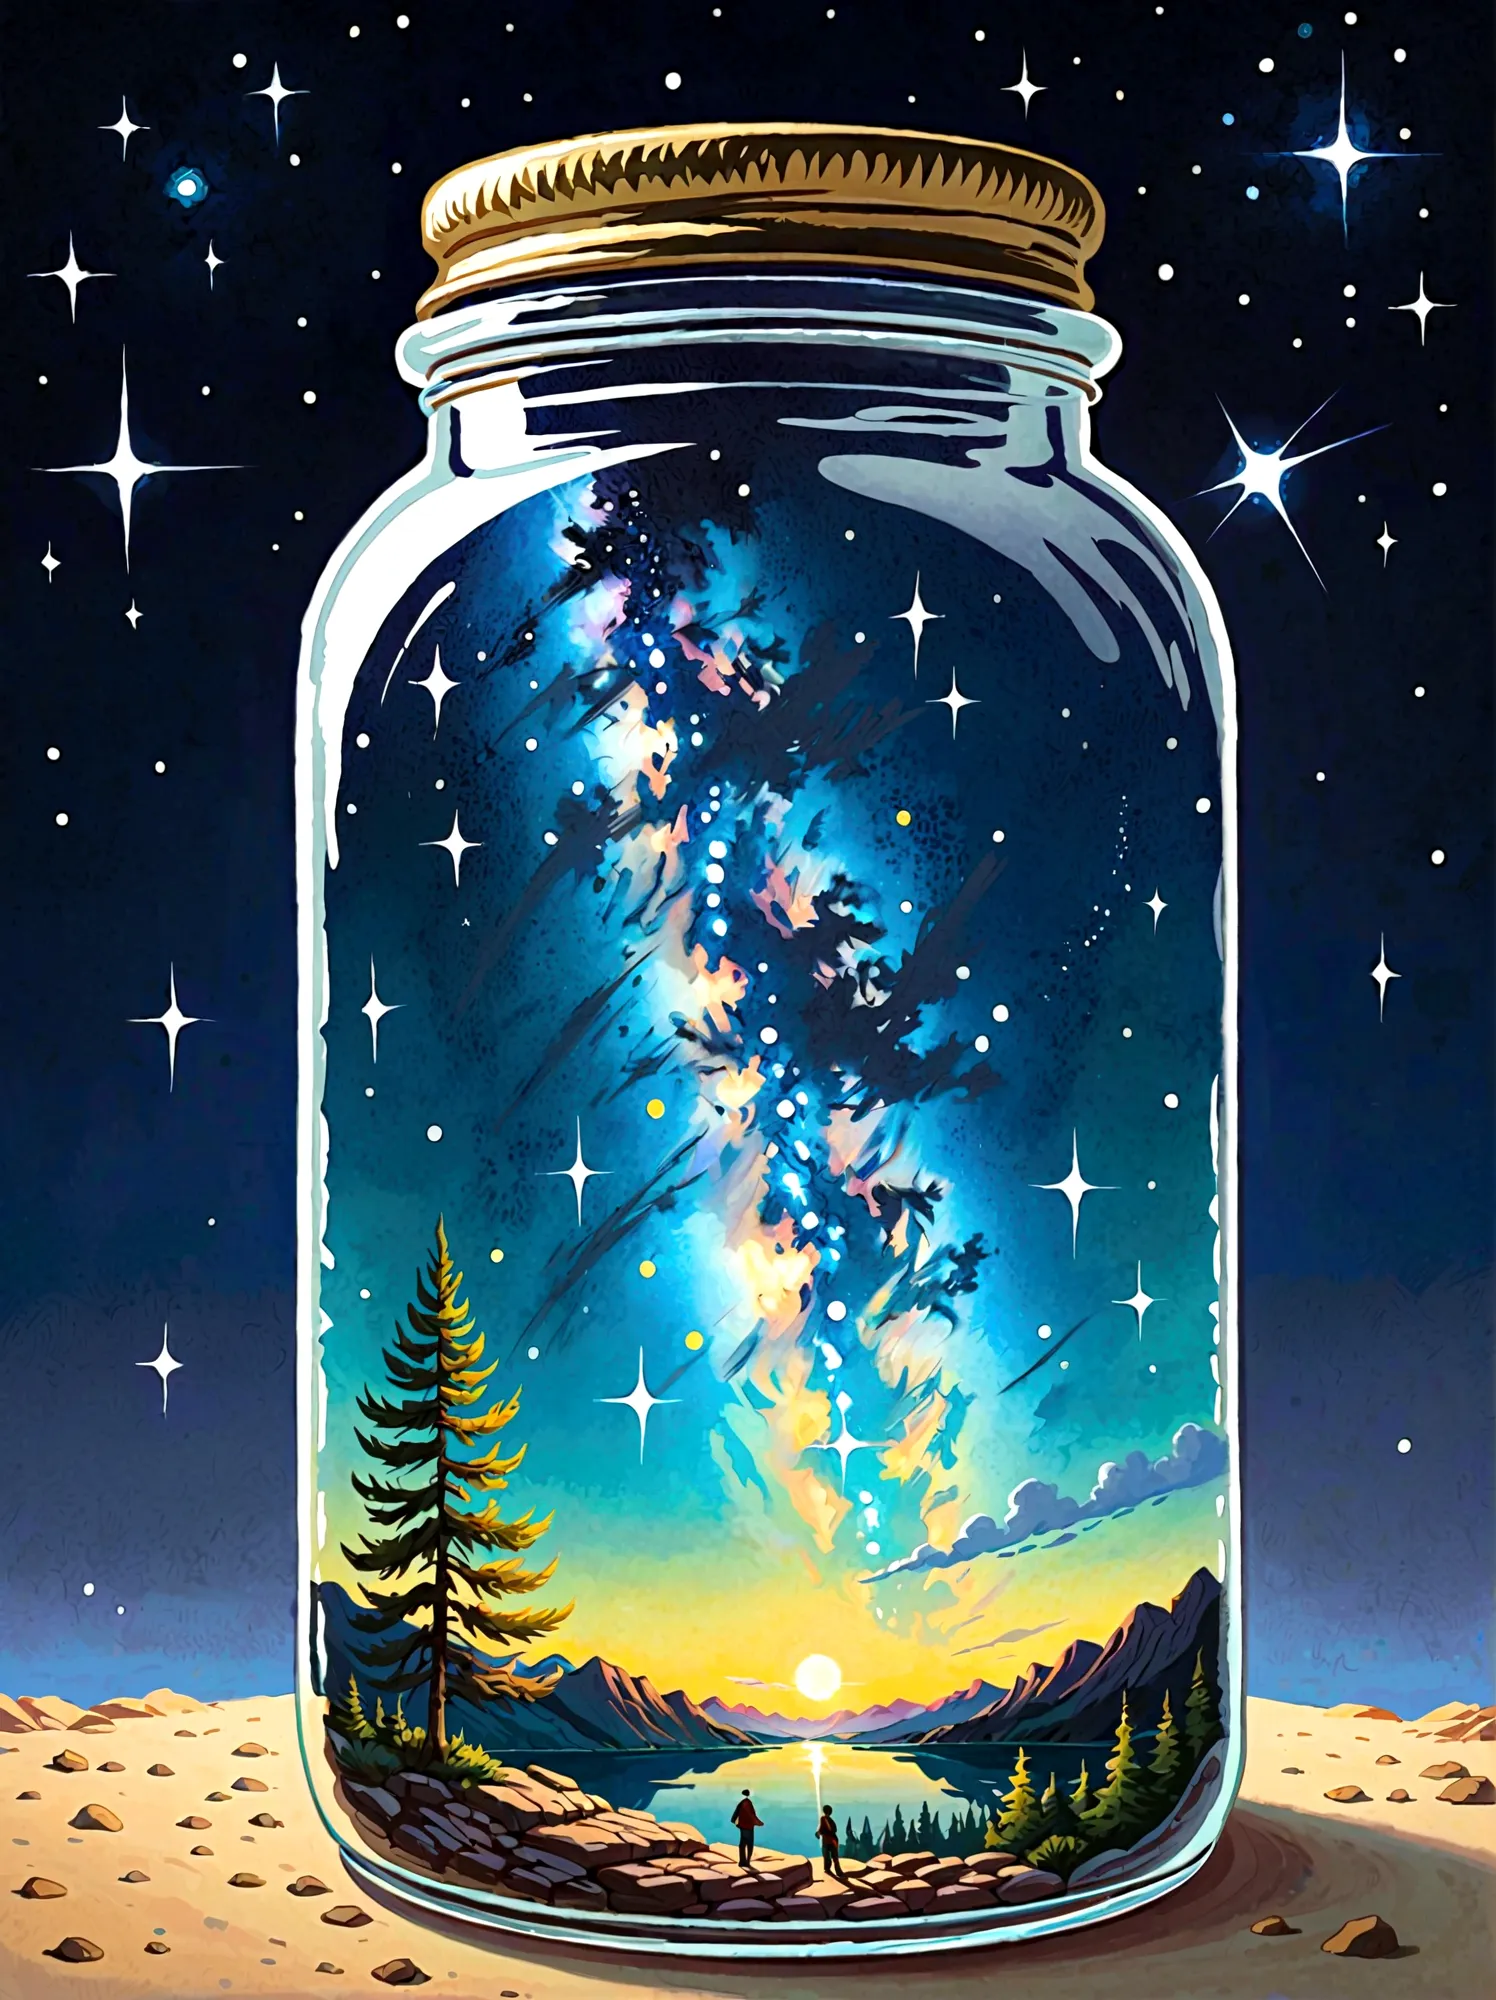 pzsj1, Masterpiece，Top quality，(Very delicate and beautiful starry sky scenery trapped in a jar), world masterpiece theater, Hig...